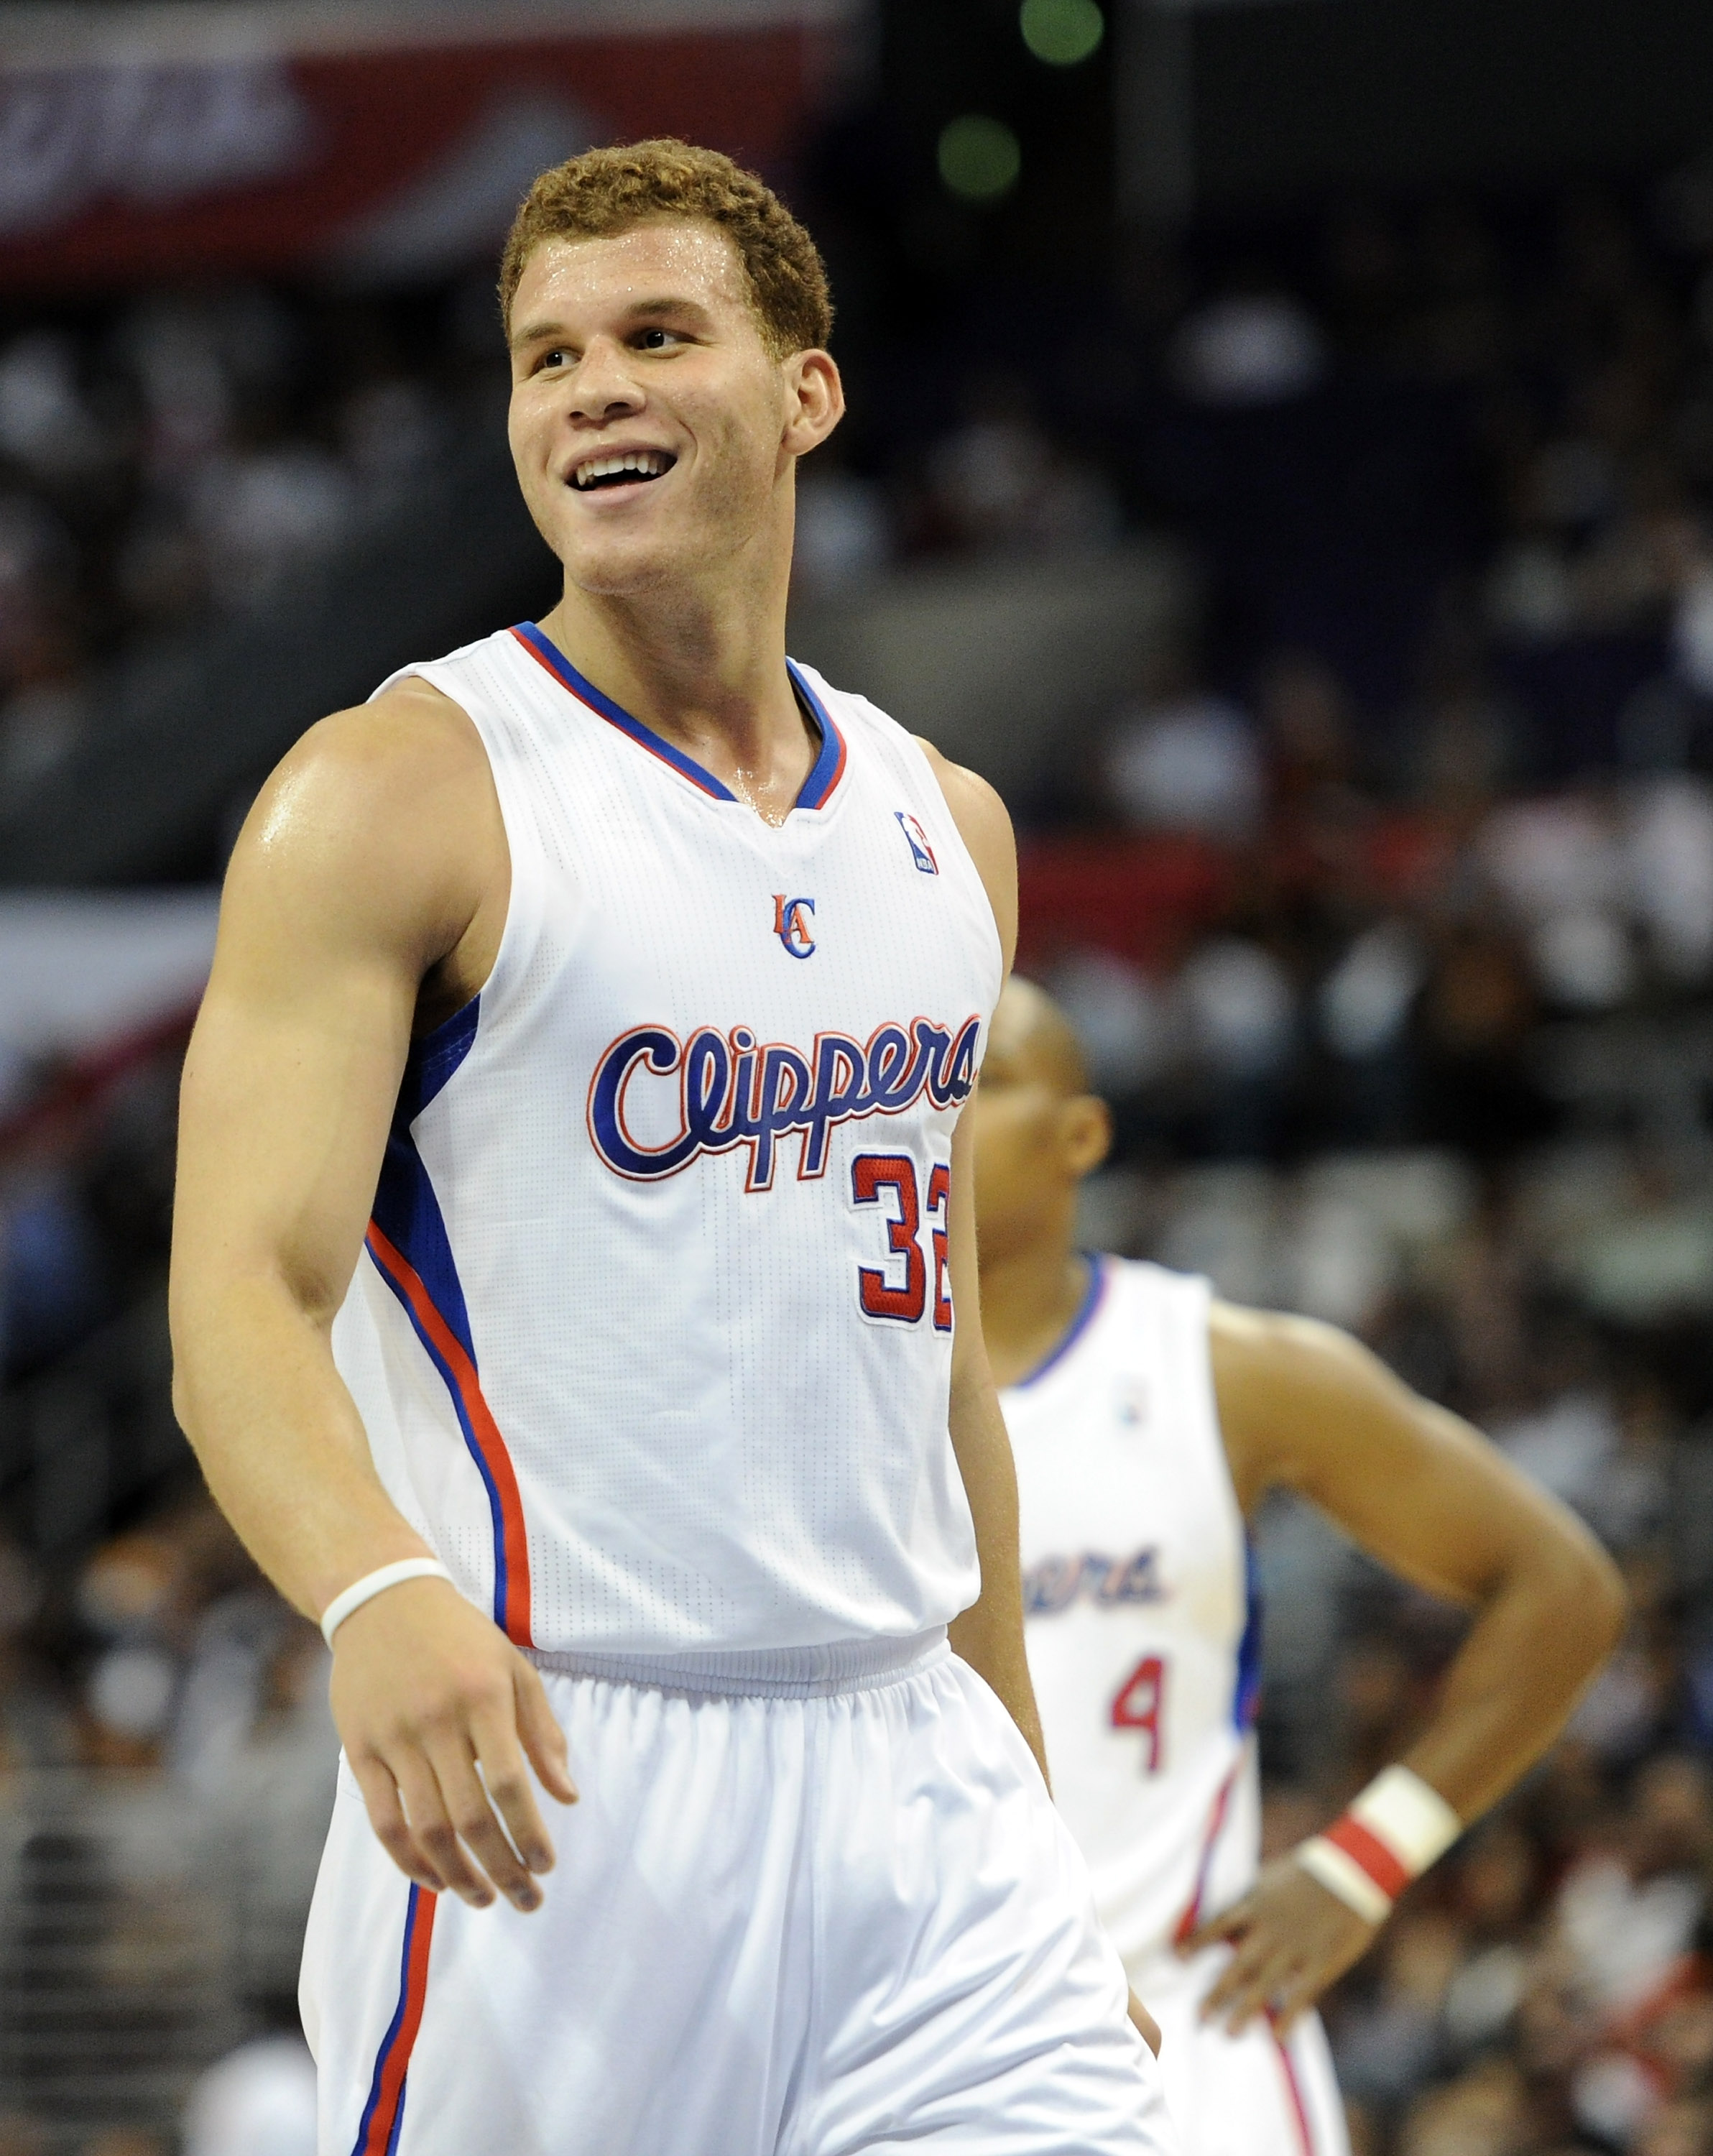 LA Clippers Fall to Portland, But the Future Is Bright with Blake